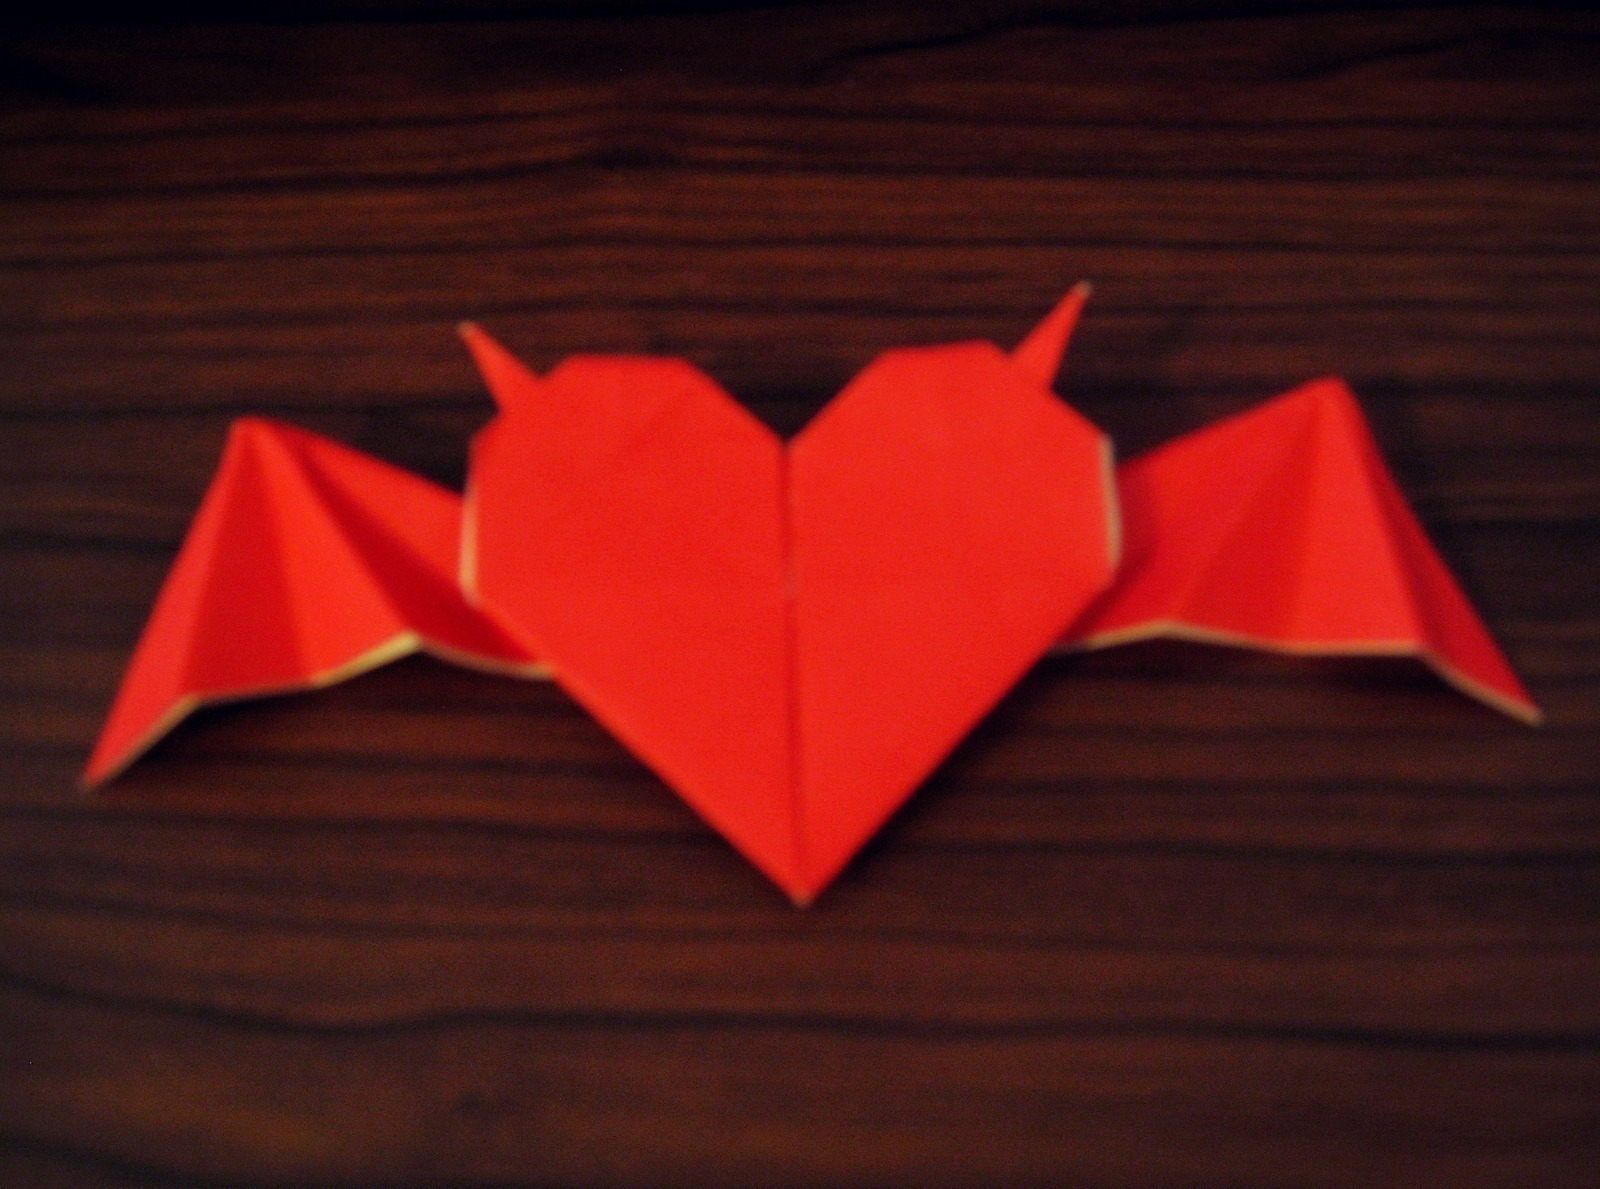 How To Do A Heart Origami Origami Heart With Horns And Bat Wings How To Fold An Origami